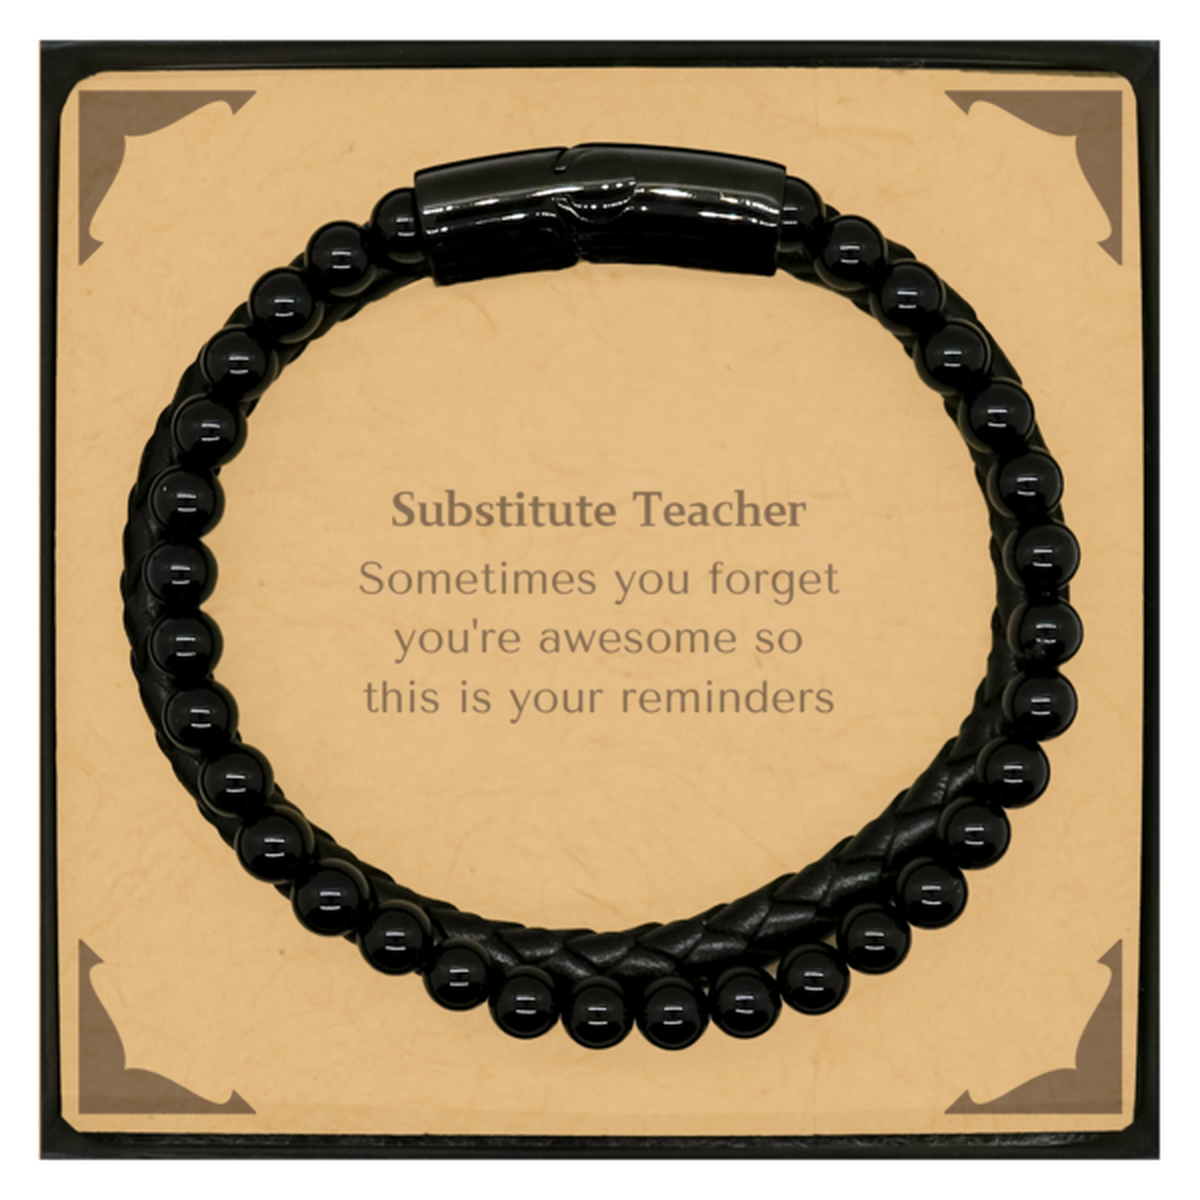 Sentimental Substitute Teacher Stone Leather Bracelets, Substitute Teacher Sometimes you forget you're awesome so this is your reminders, Graduation Christmas Birthday Gifts for Substitute Teacher, Men, Women, Coworkers